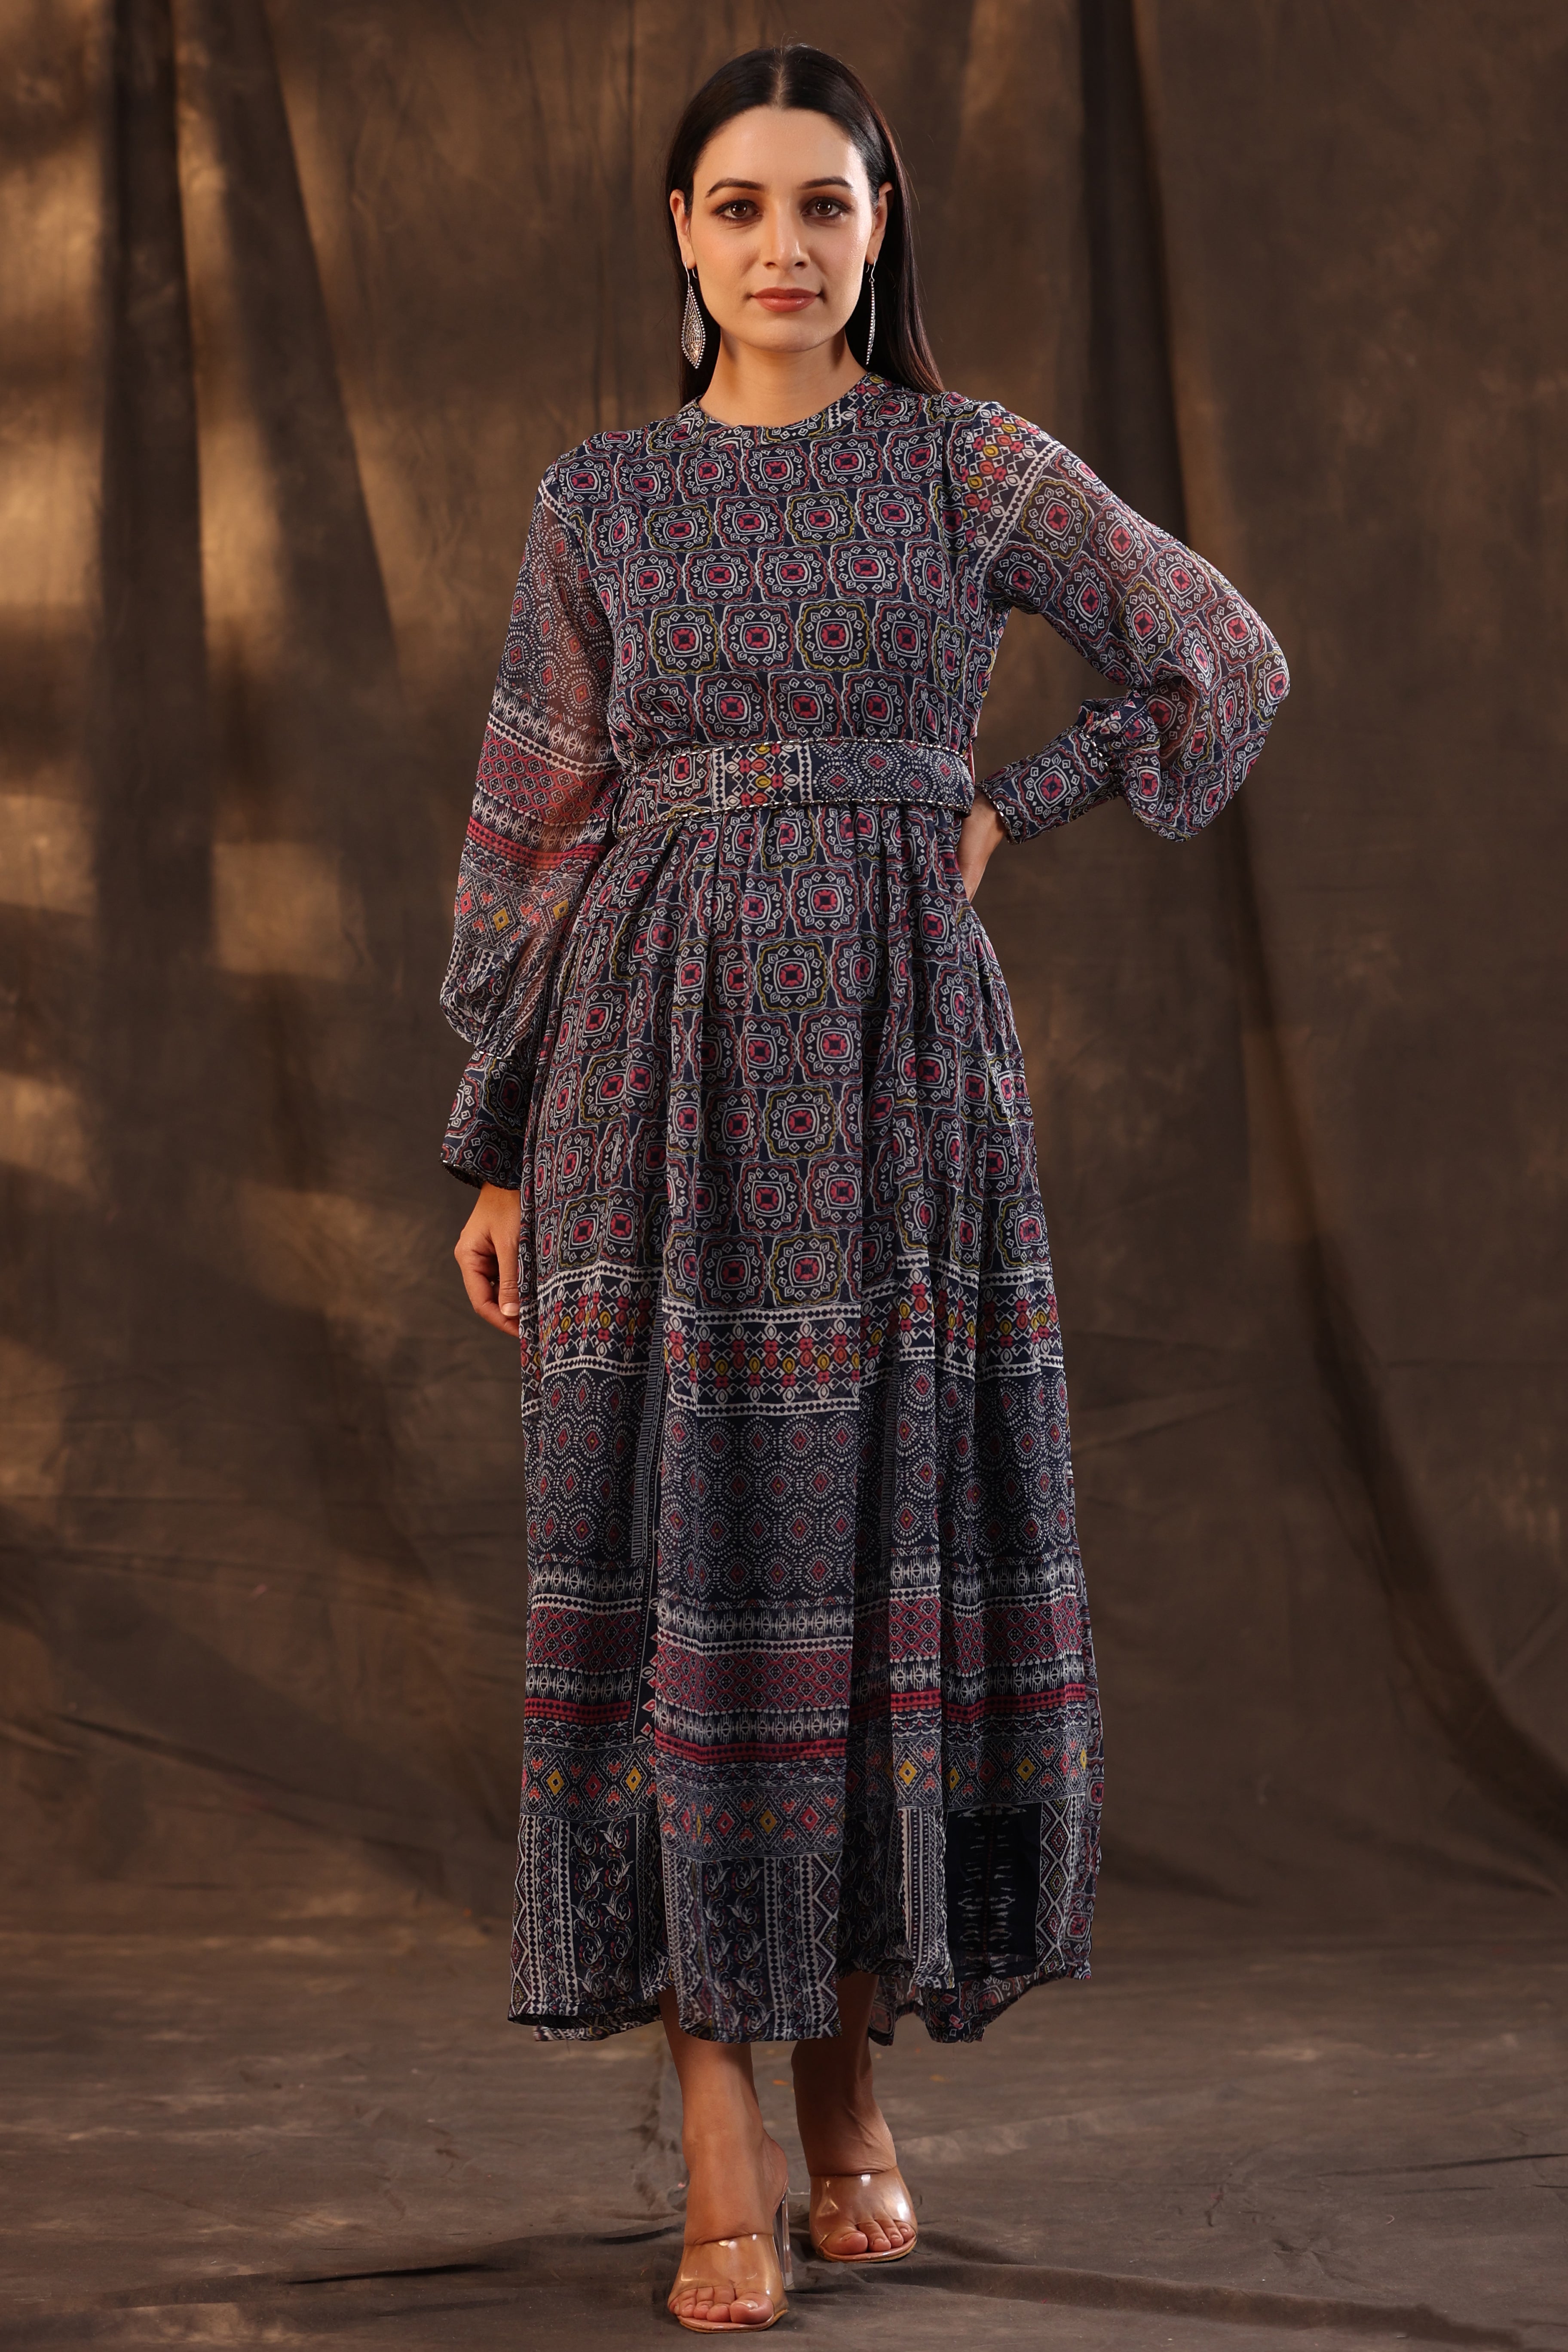 Juniper Navy Blue Geometric Printed Chiffon Flared Maxi Dress With Buttons.